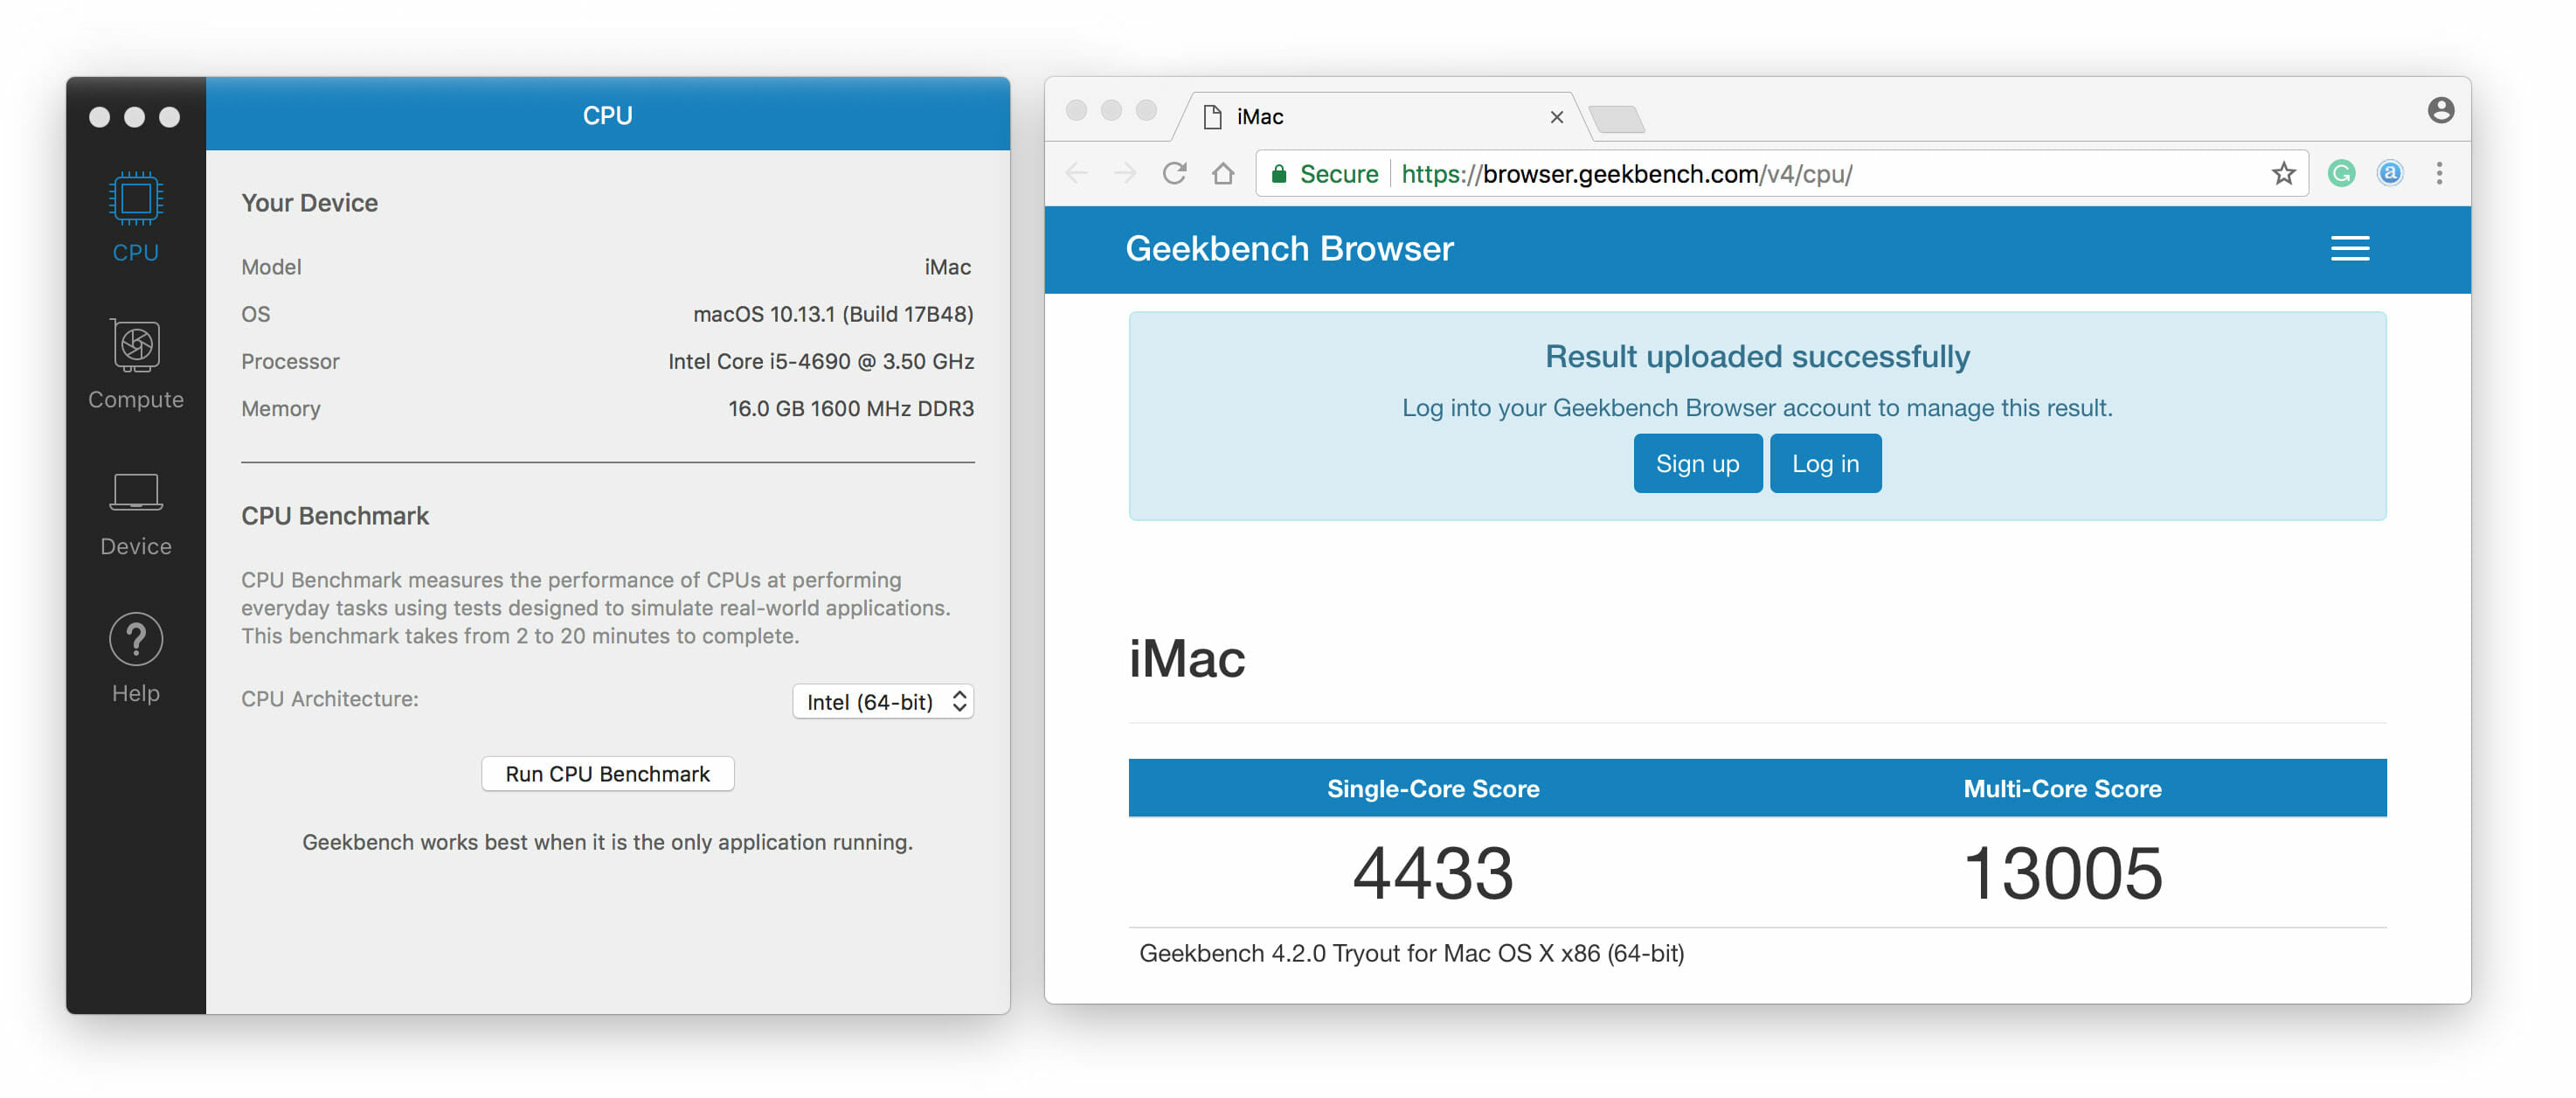 osx-speculative-003-before-geekbench-simple